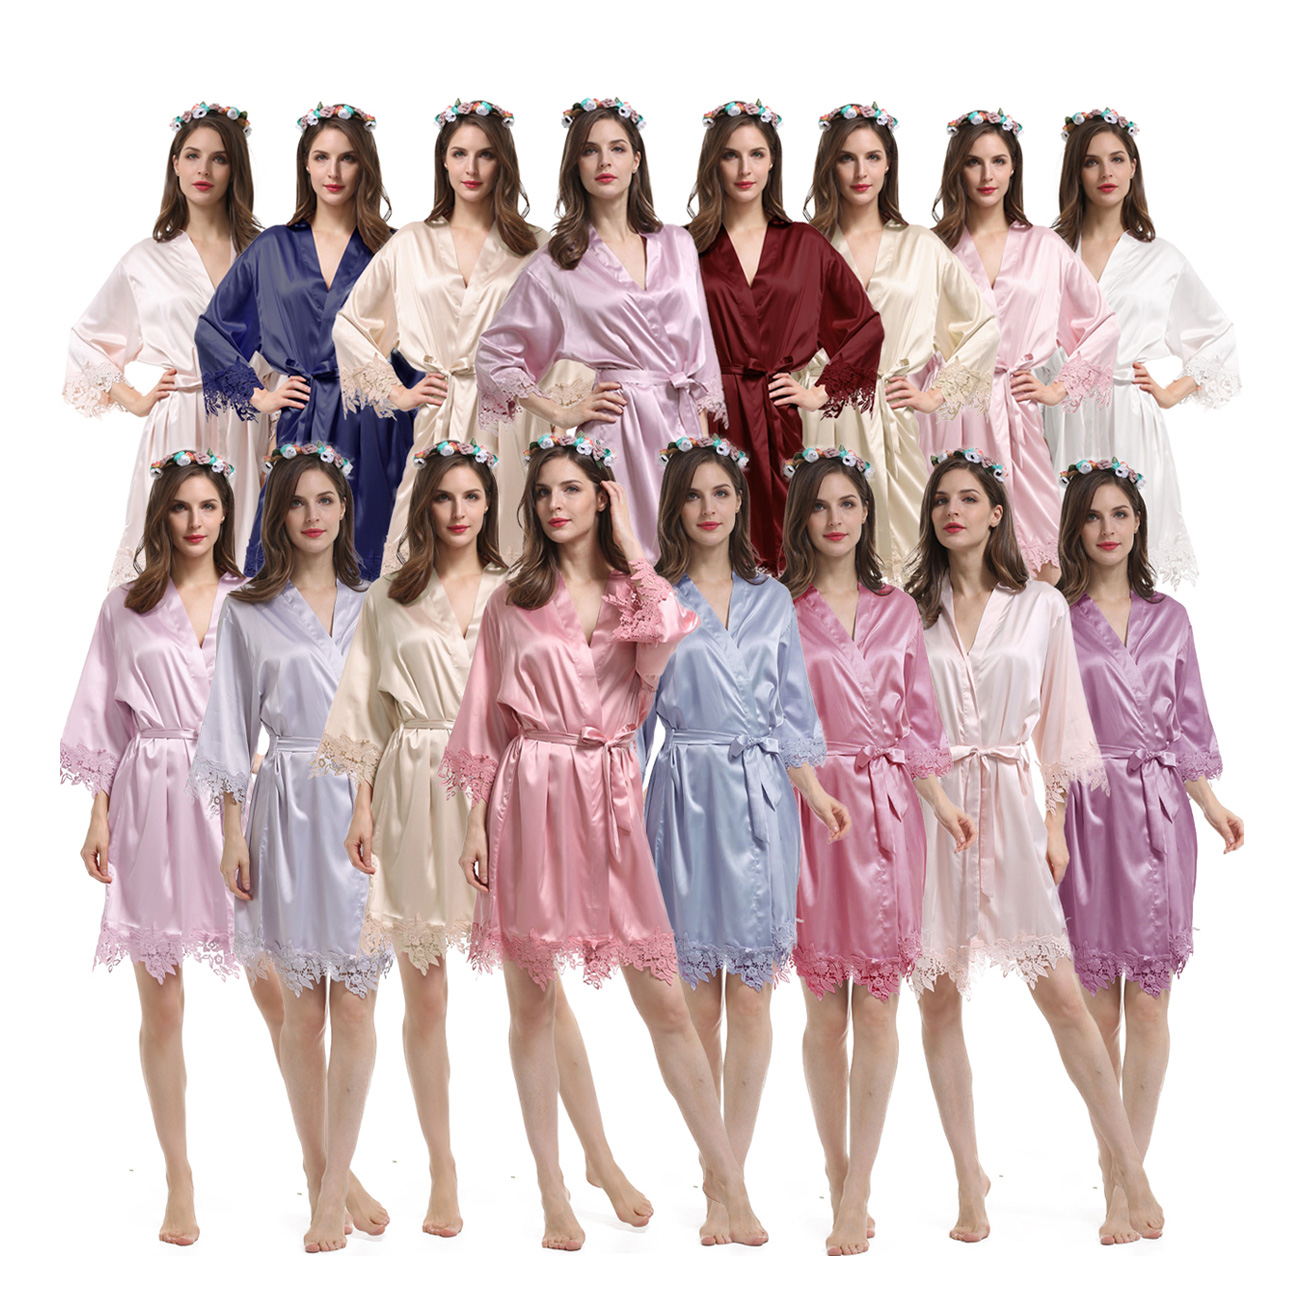 Style No: A9008 Women / Girl Plain Matte Silky Satin Wedding/Bridal/Bridesmaid Robes with Lace